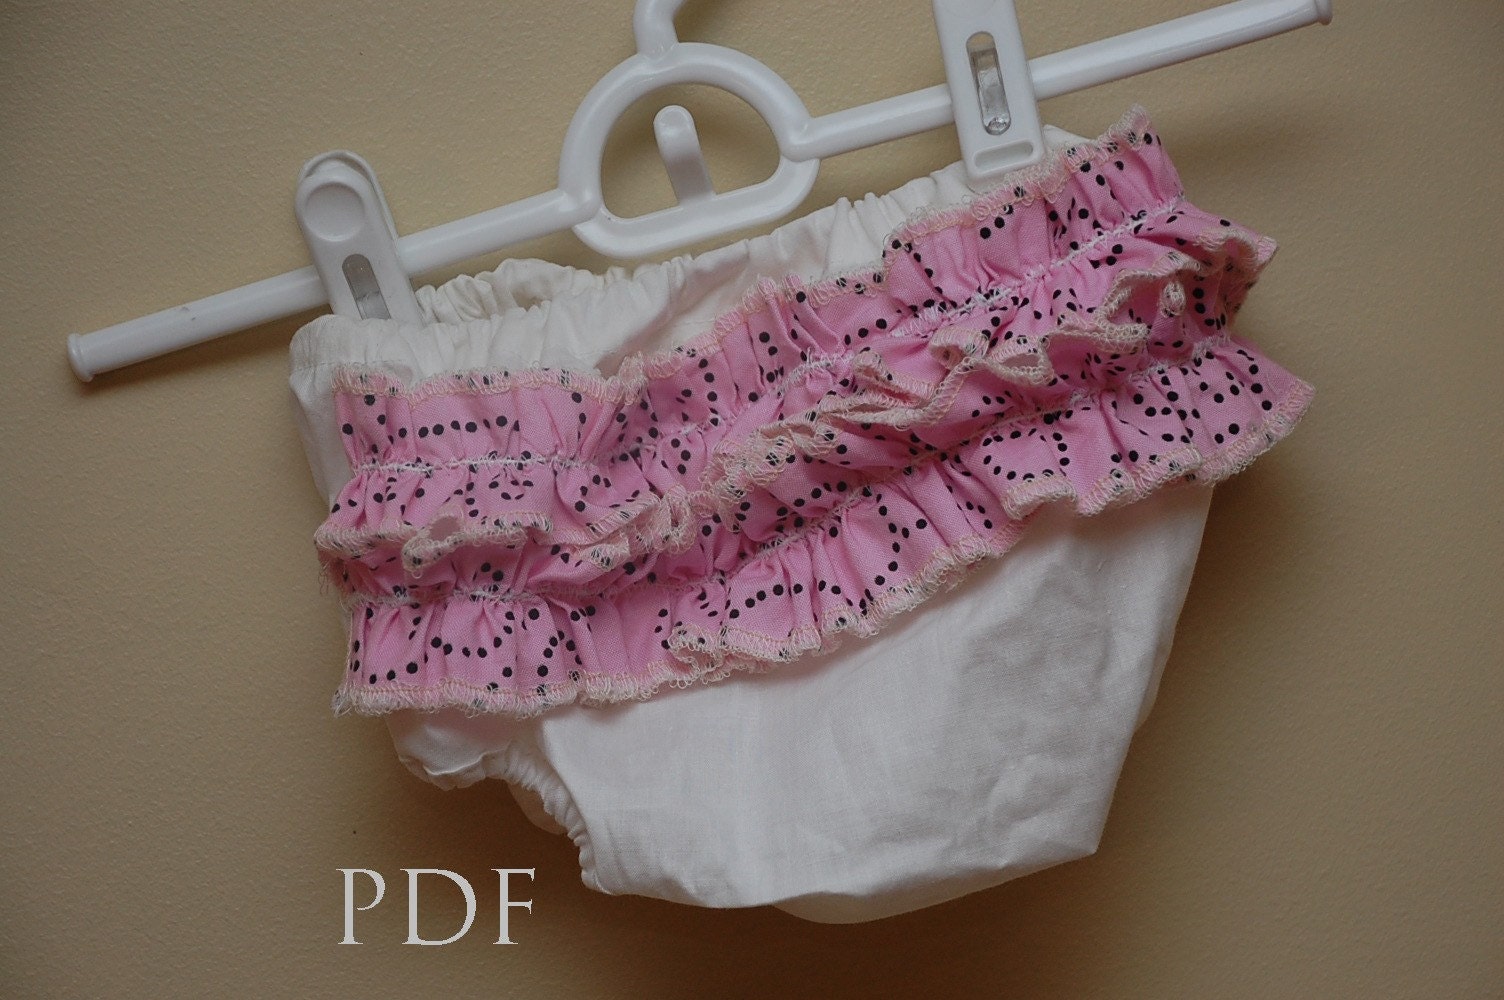 Where can I find free printable sewing patterns? - Yahoo! Answers